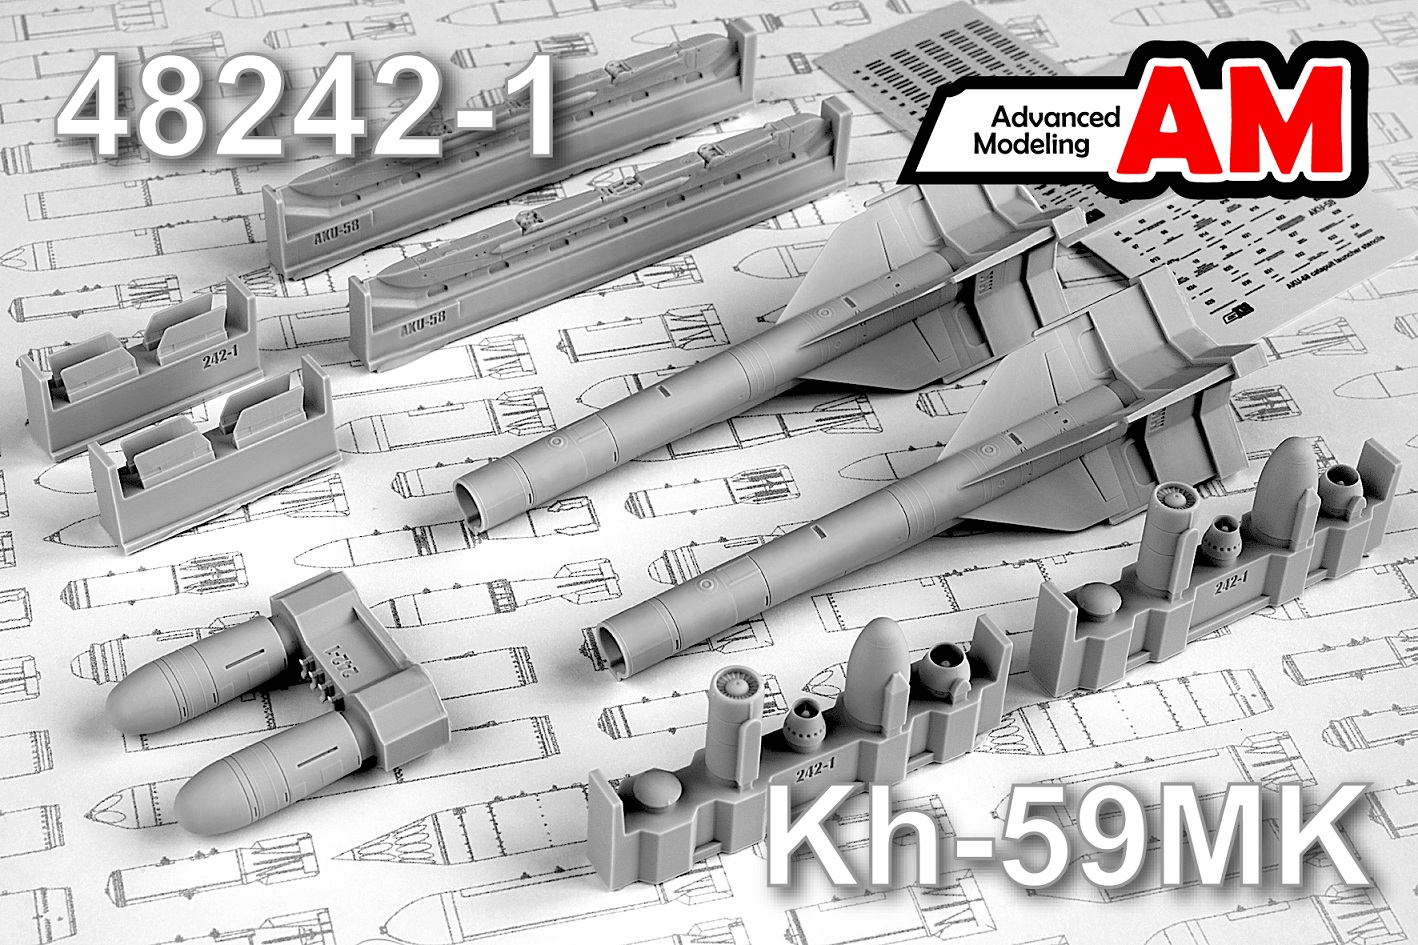 Additions (3D resin printing) 1/48 Aircraft guided missile Kh-58MK with launcher AKU-58 (Advanced Modeling) 